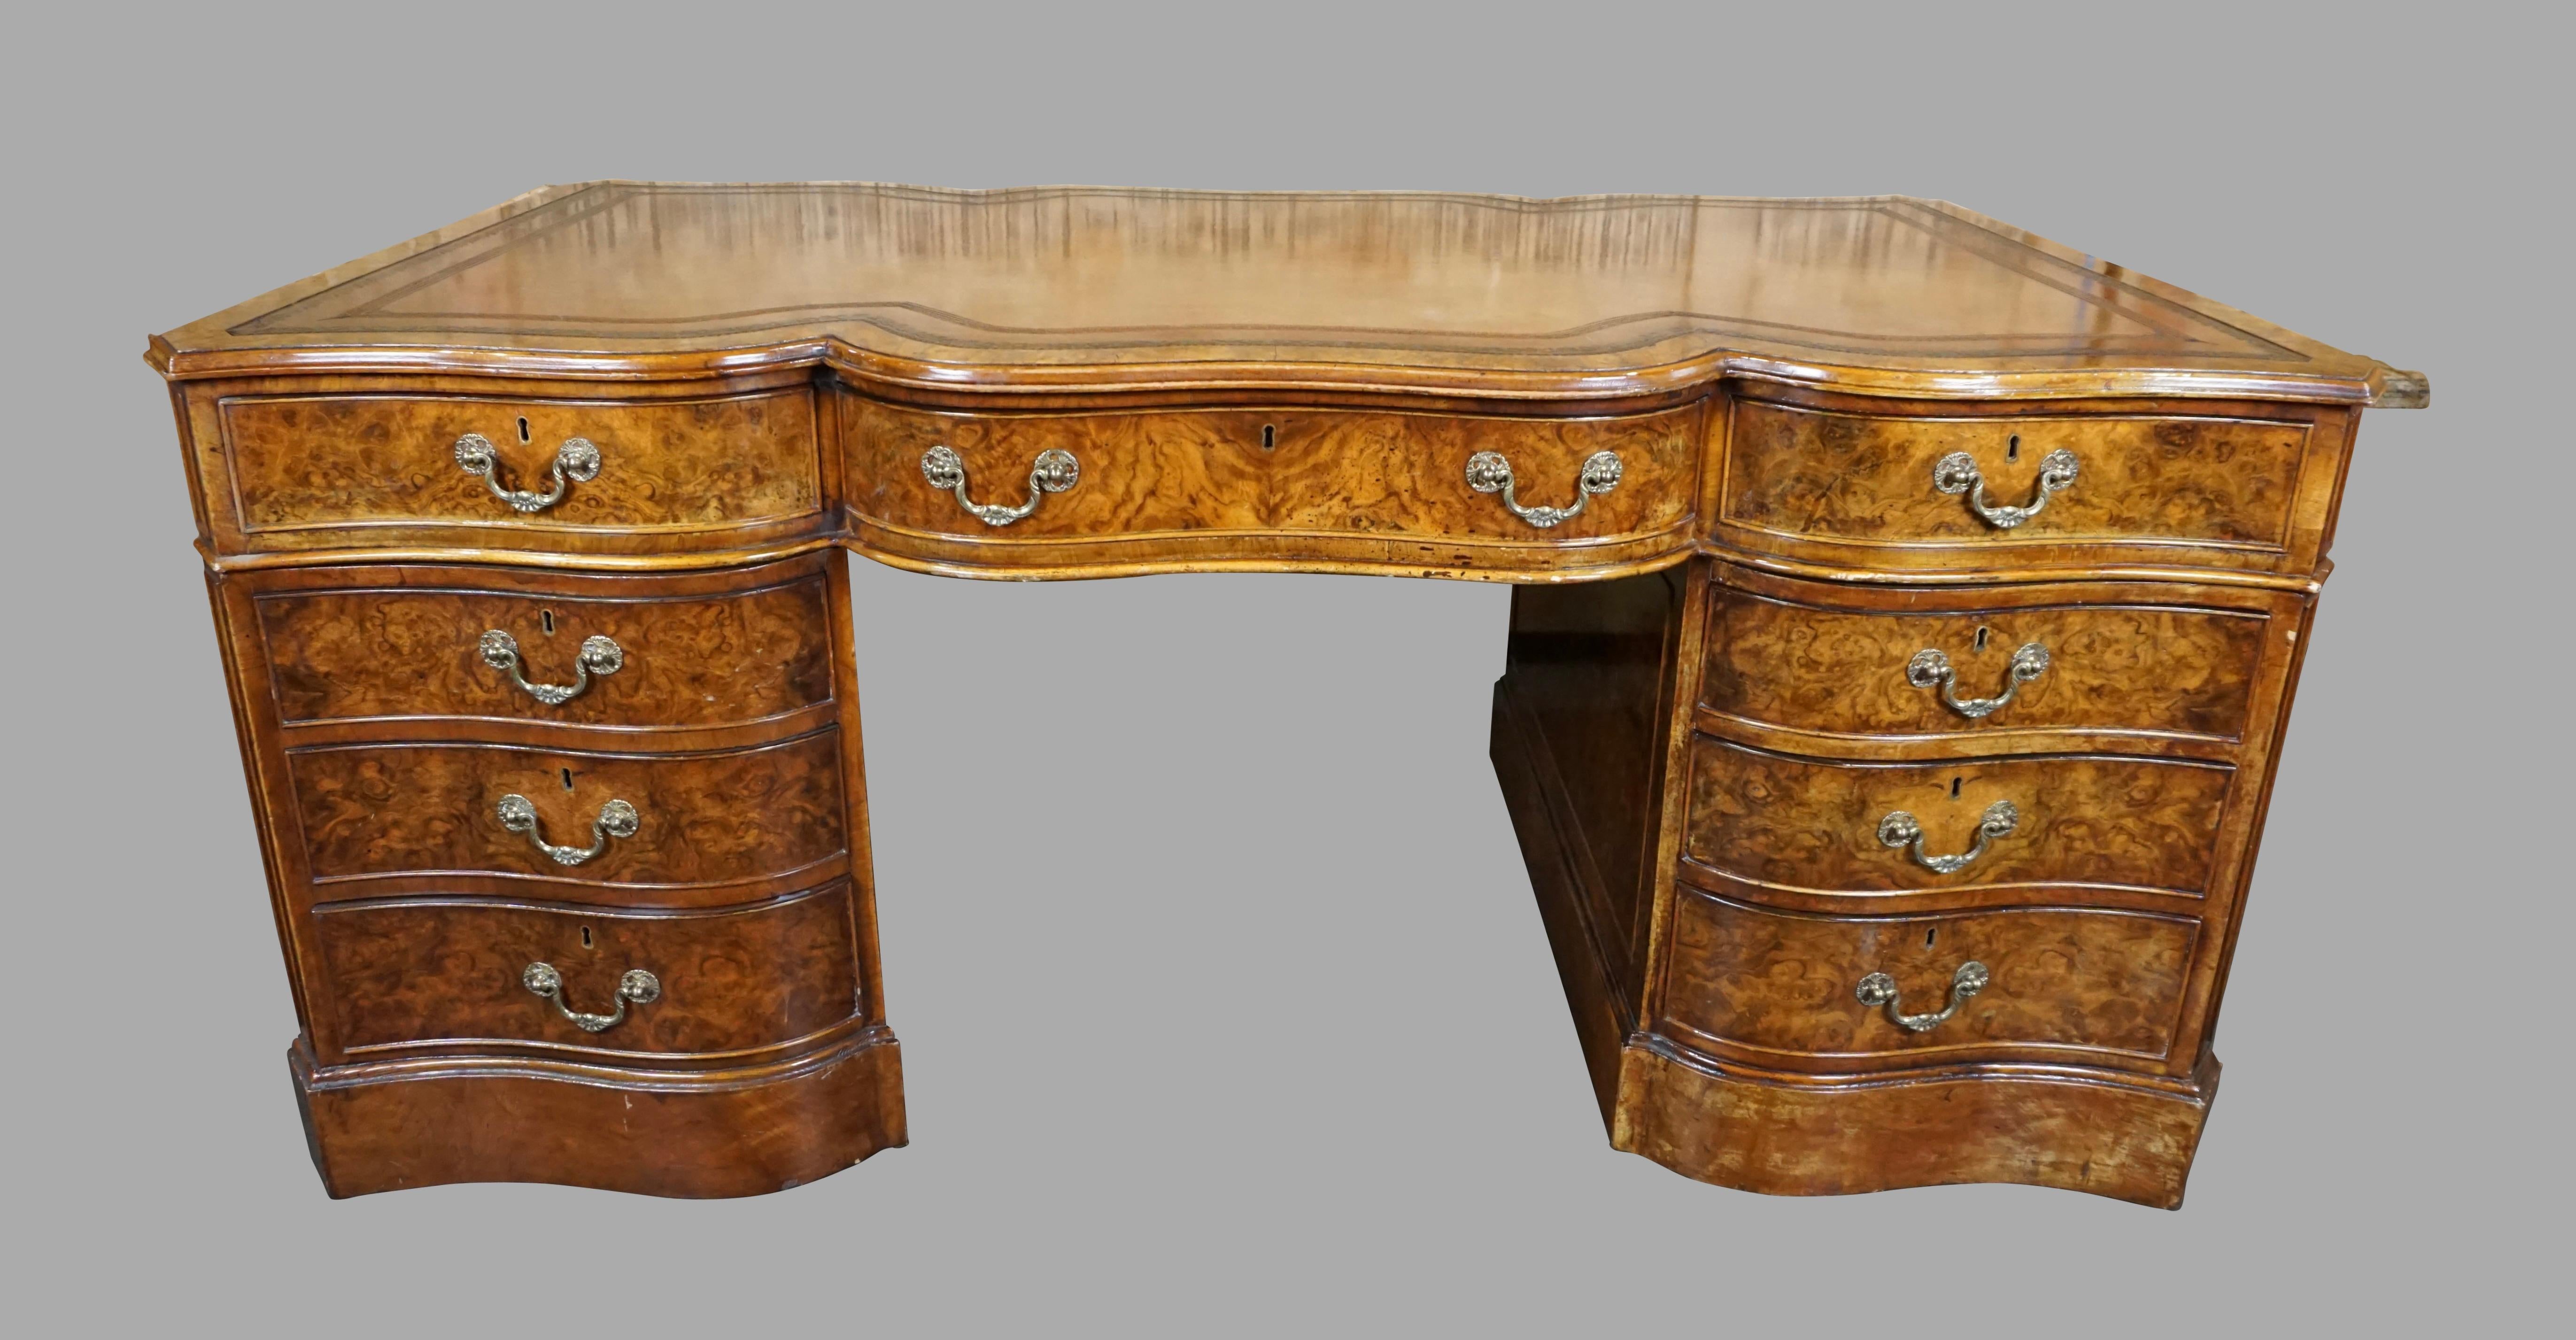 A beautifully crafted English Georgian style burl walnut partners desk of serpentine form, the tooled brown leather top above 3 frieze drawers resting on 6 additional drawers, the reverse fitted with cabinets below the frieze drawers, all on a